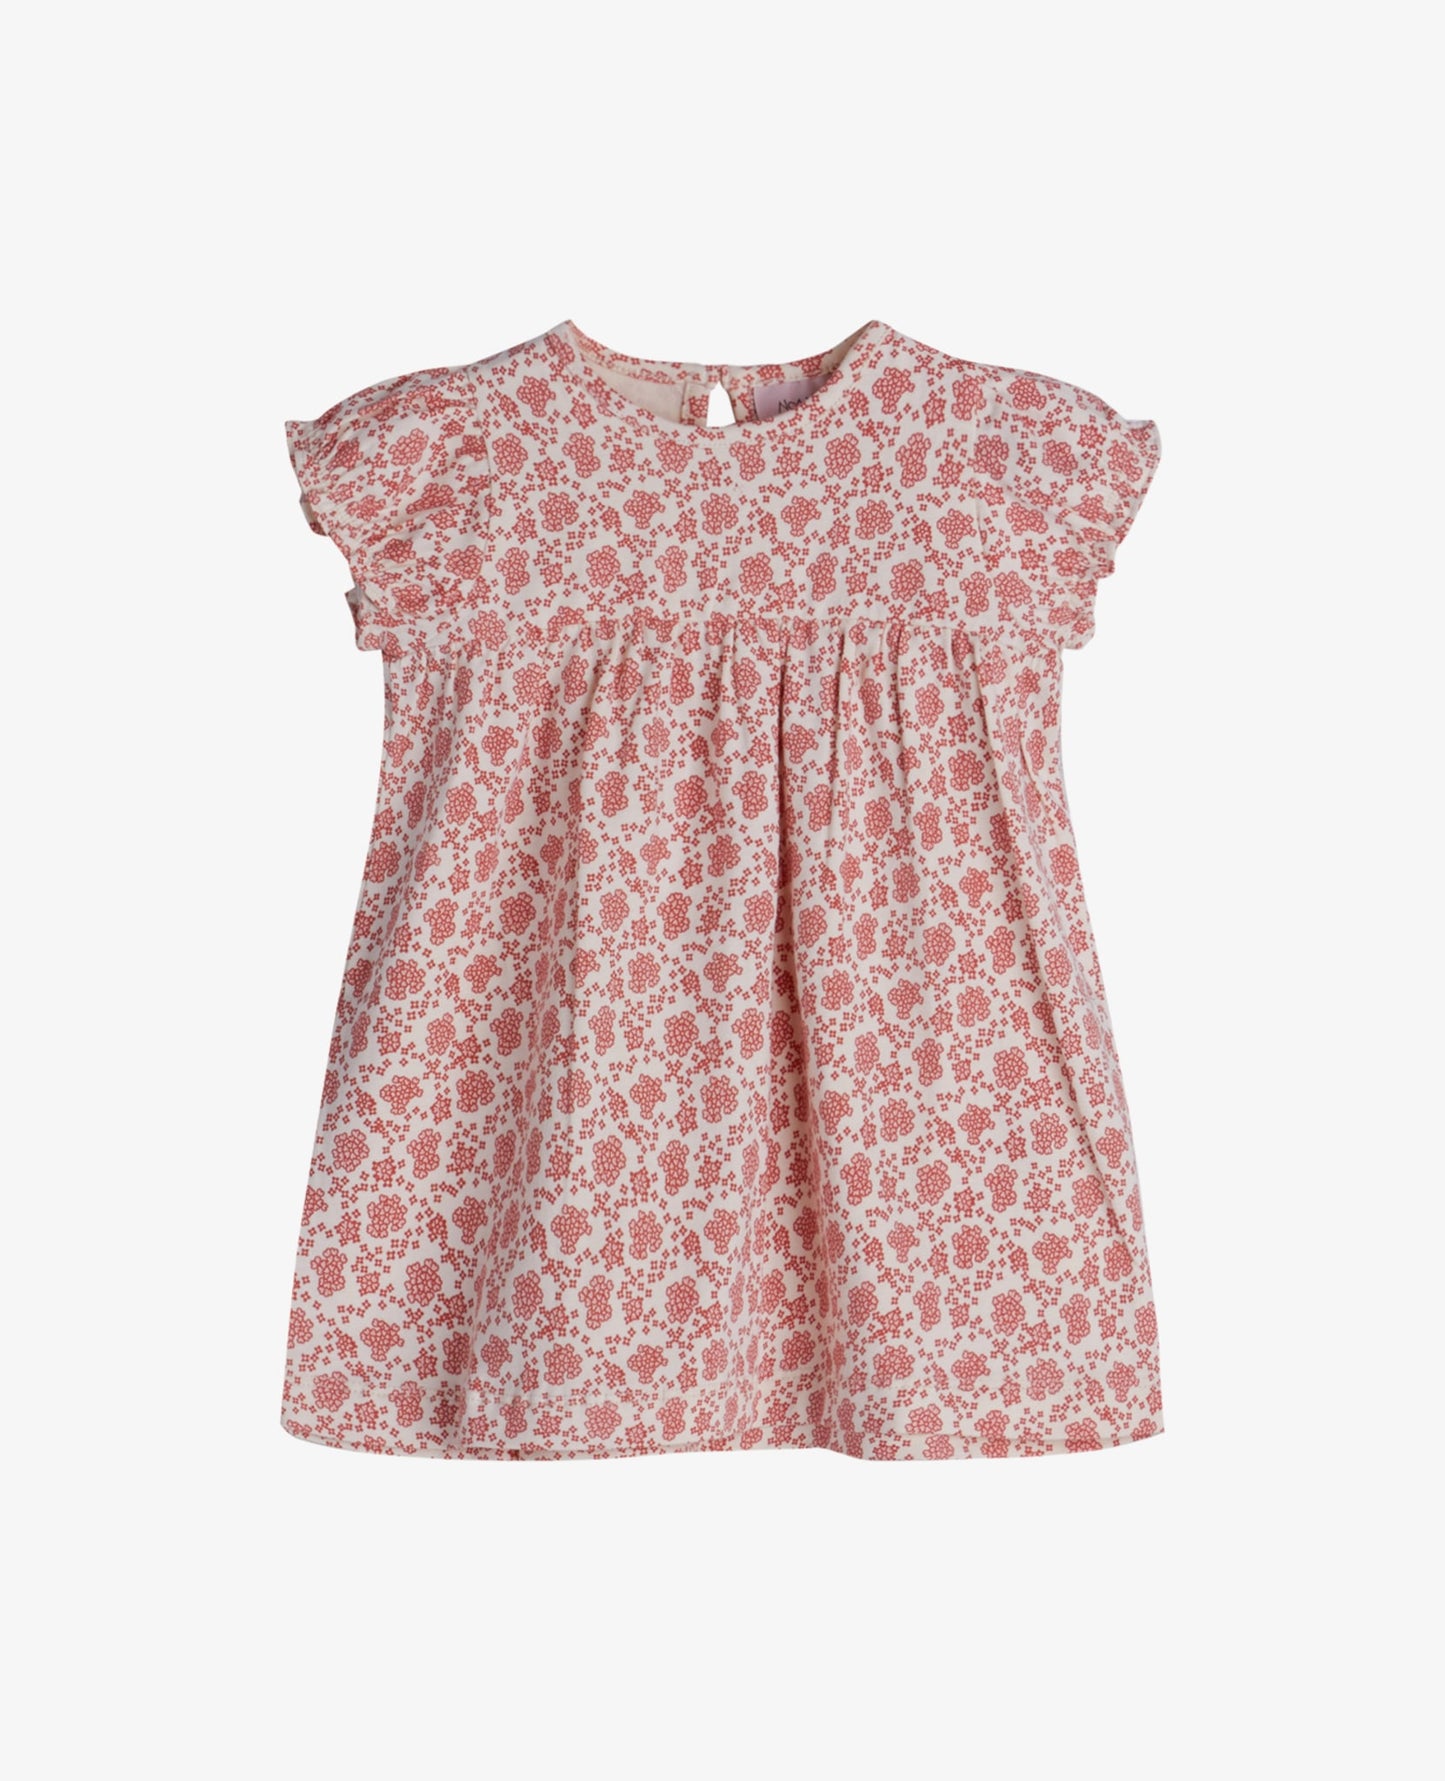 BABY ORGANIC SMALL FLOWER JERS KLEID